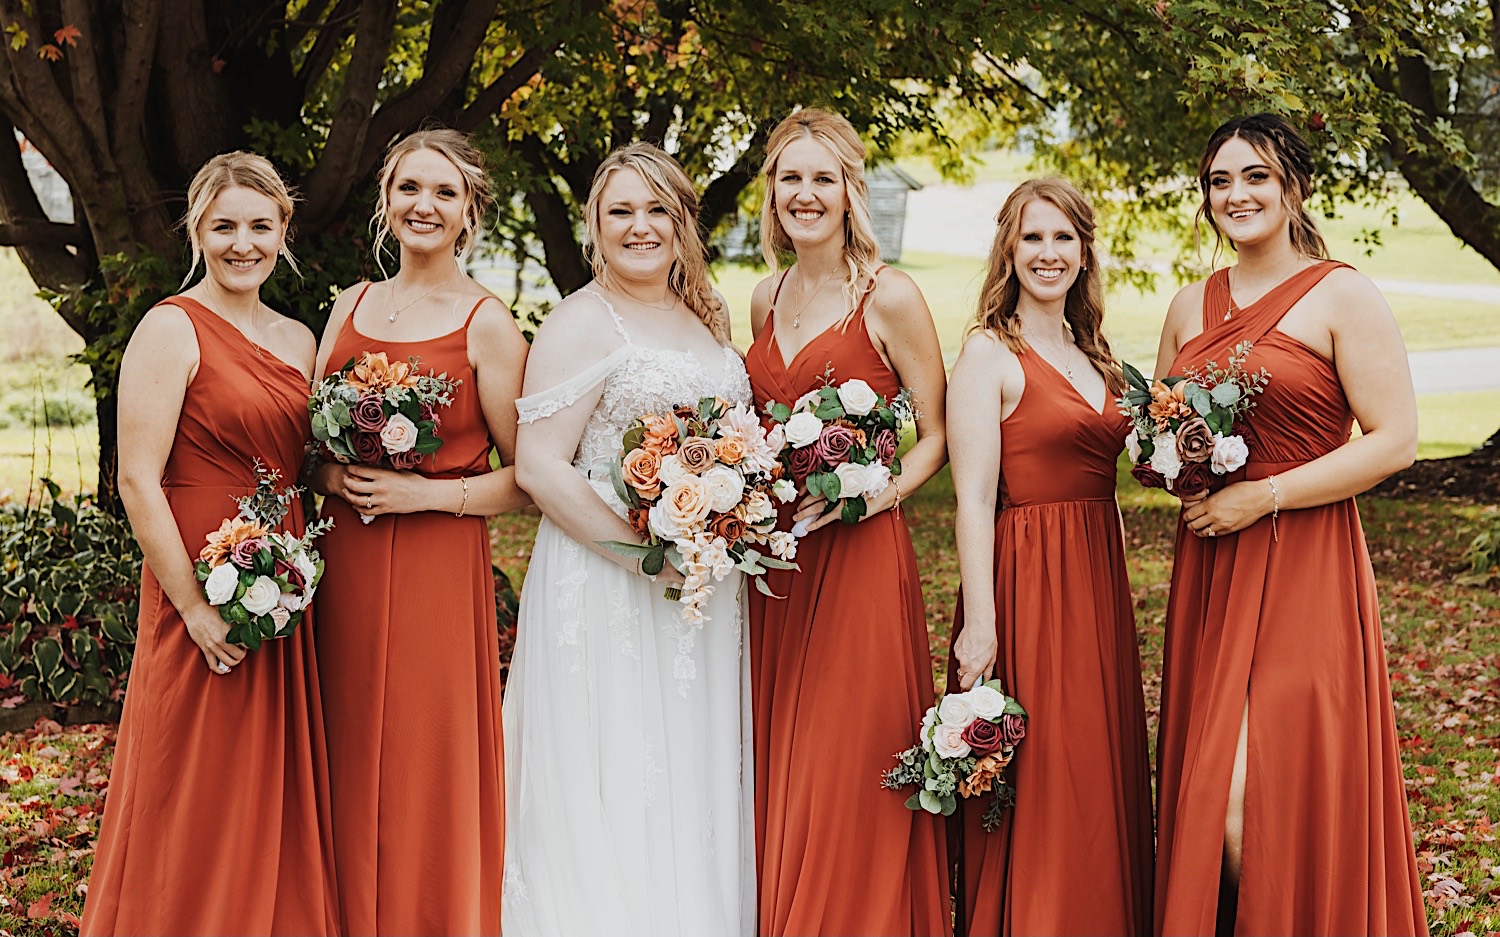 A bride and her bridesmaids stand together and smile at the camera while outdoors, photo taken by a Minneapolis wedding photographer